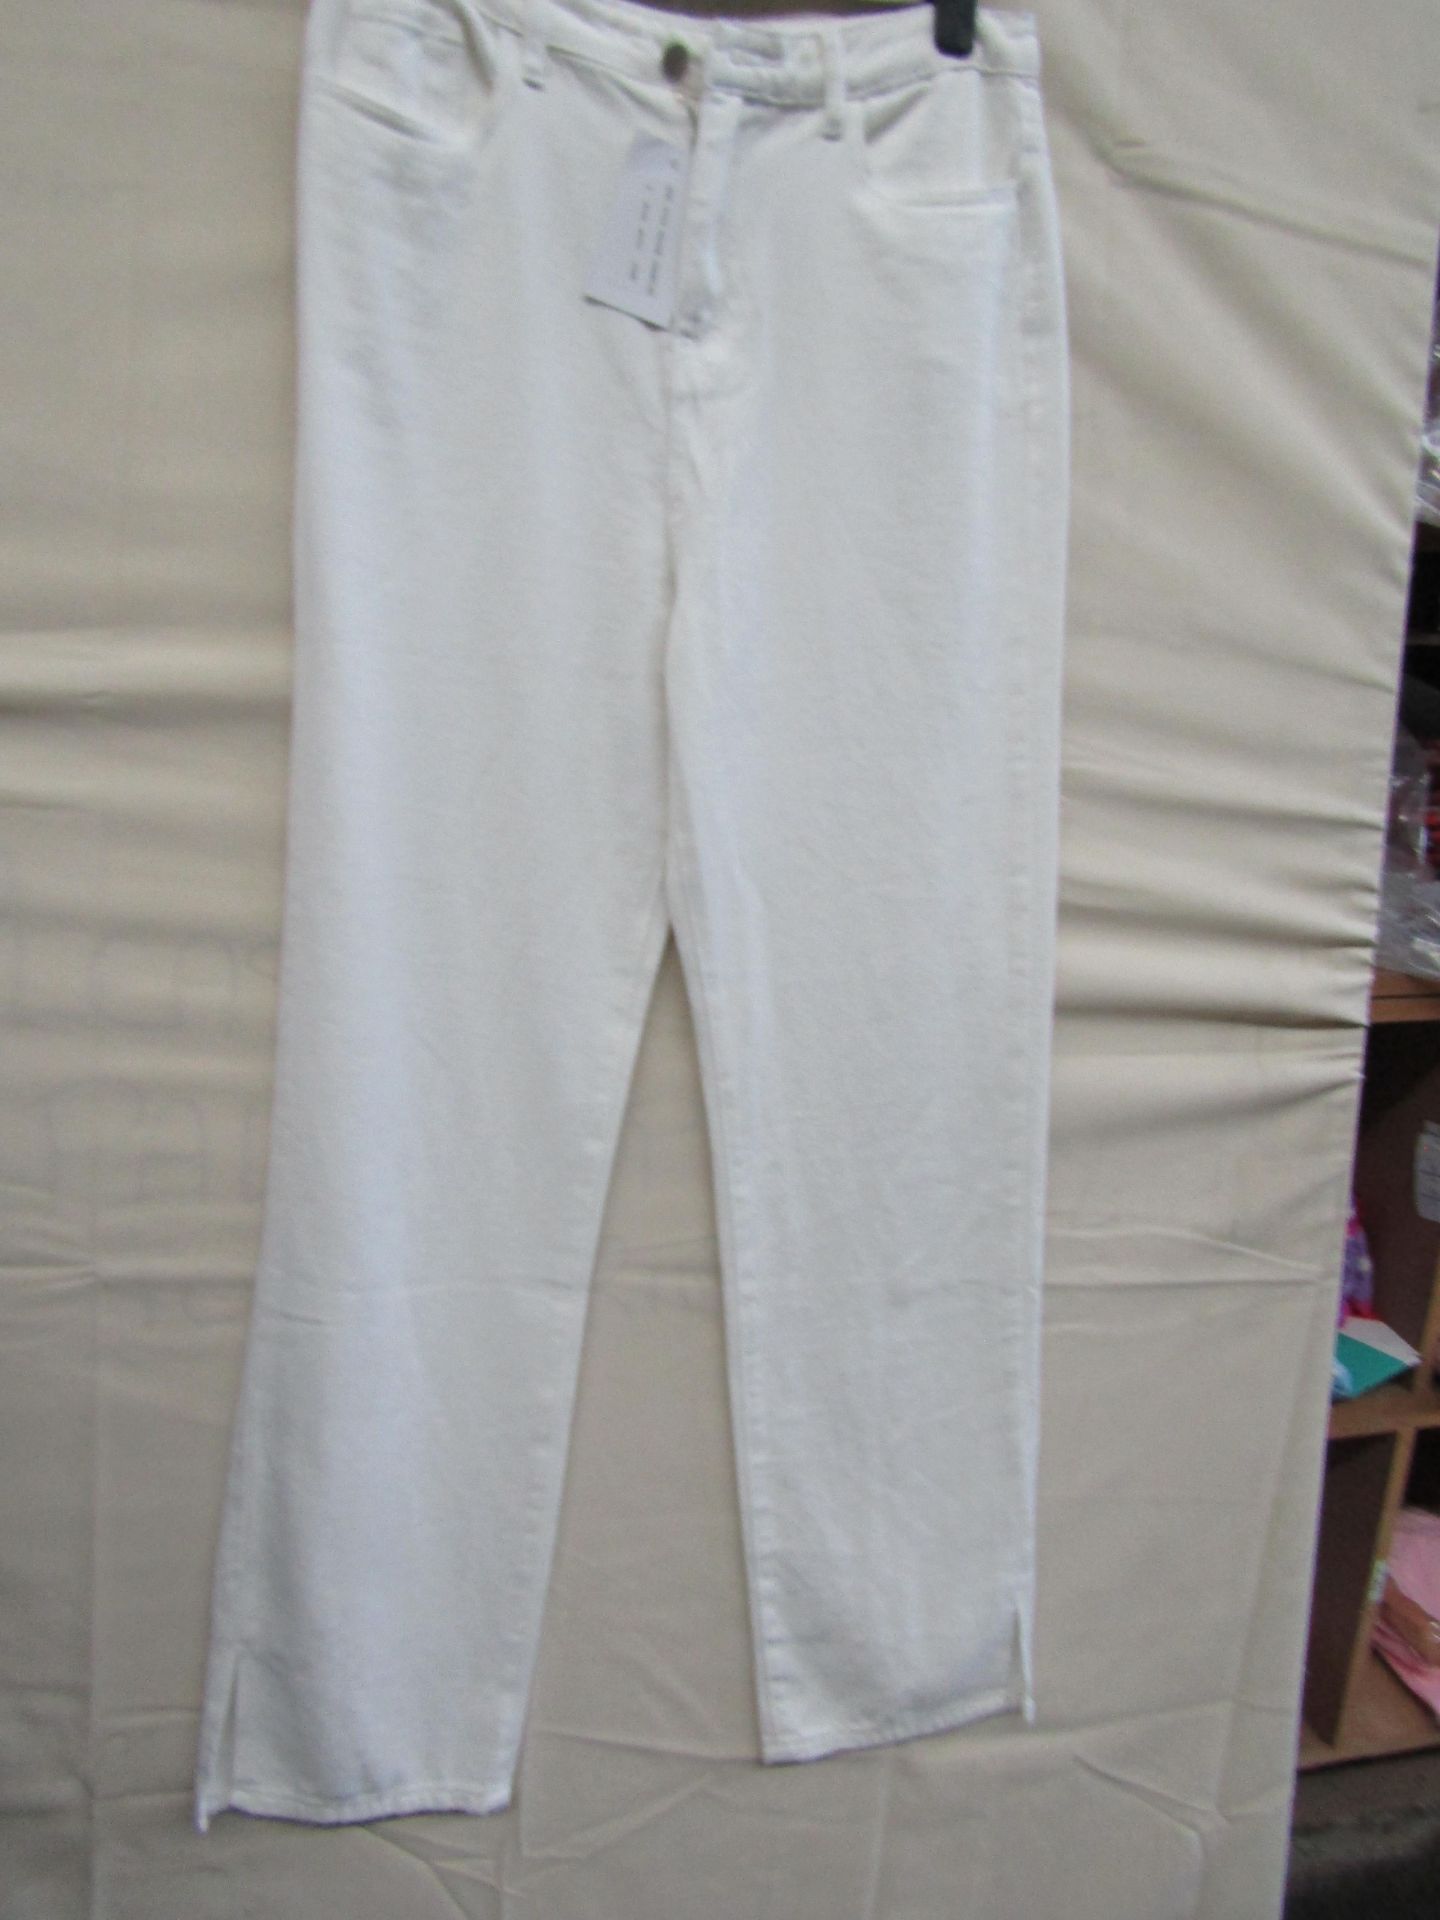 In The Style Jeans White Size 12 New With Tags